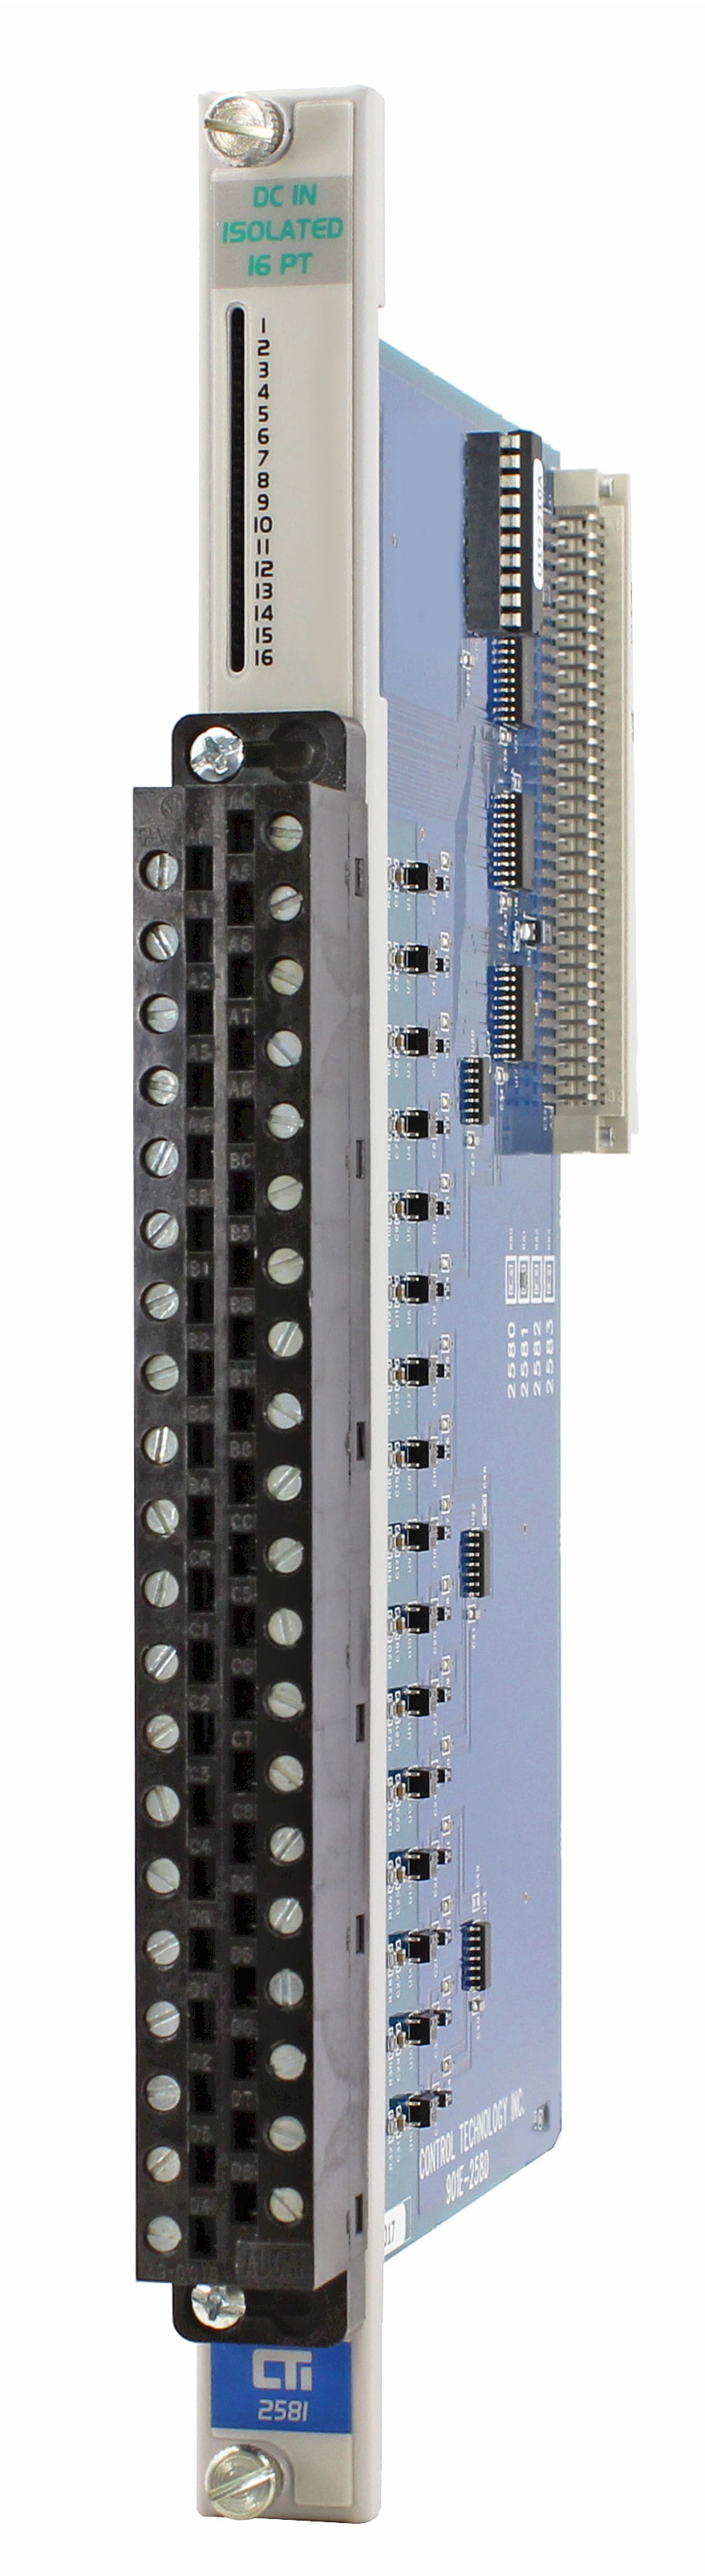 2581 16-Point Isolated 12-56 VDC Input Module